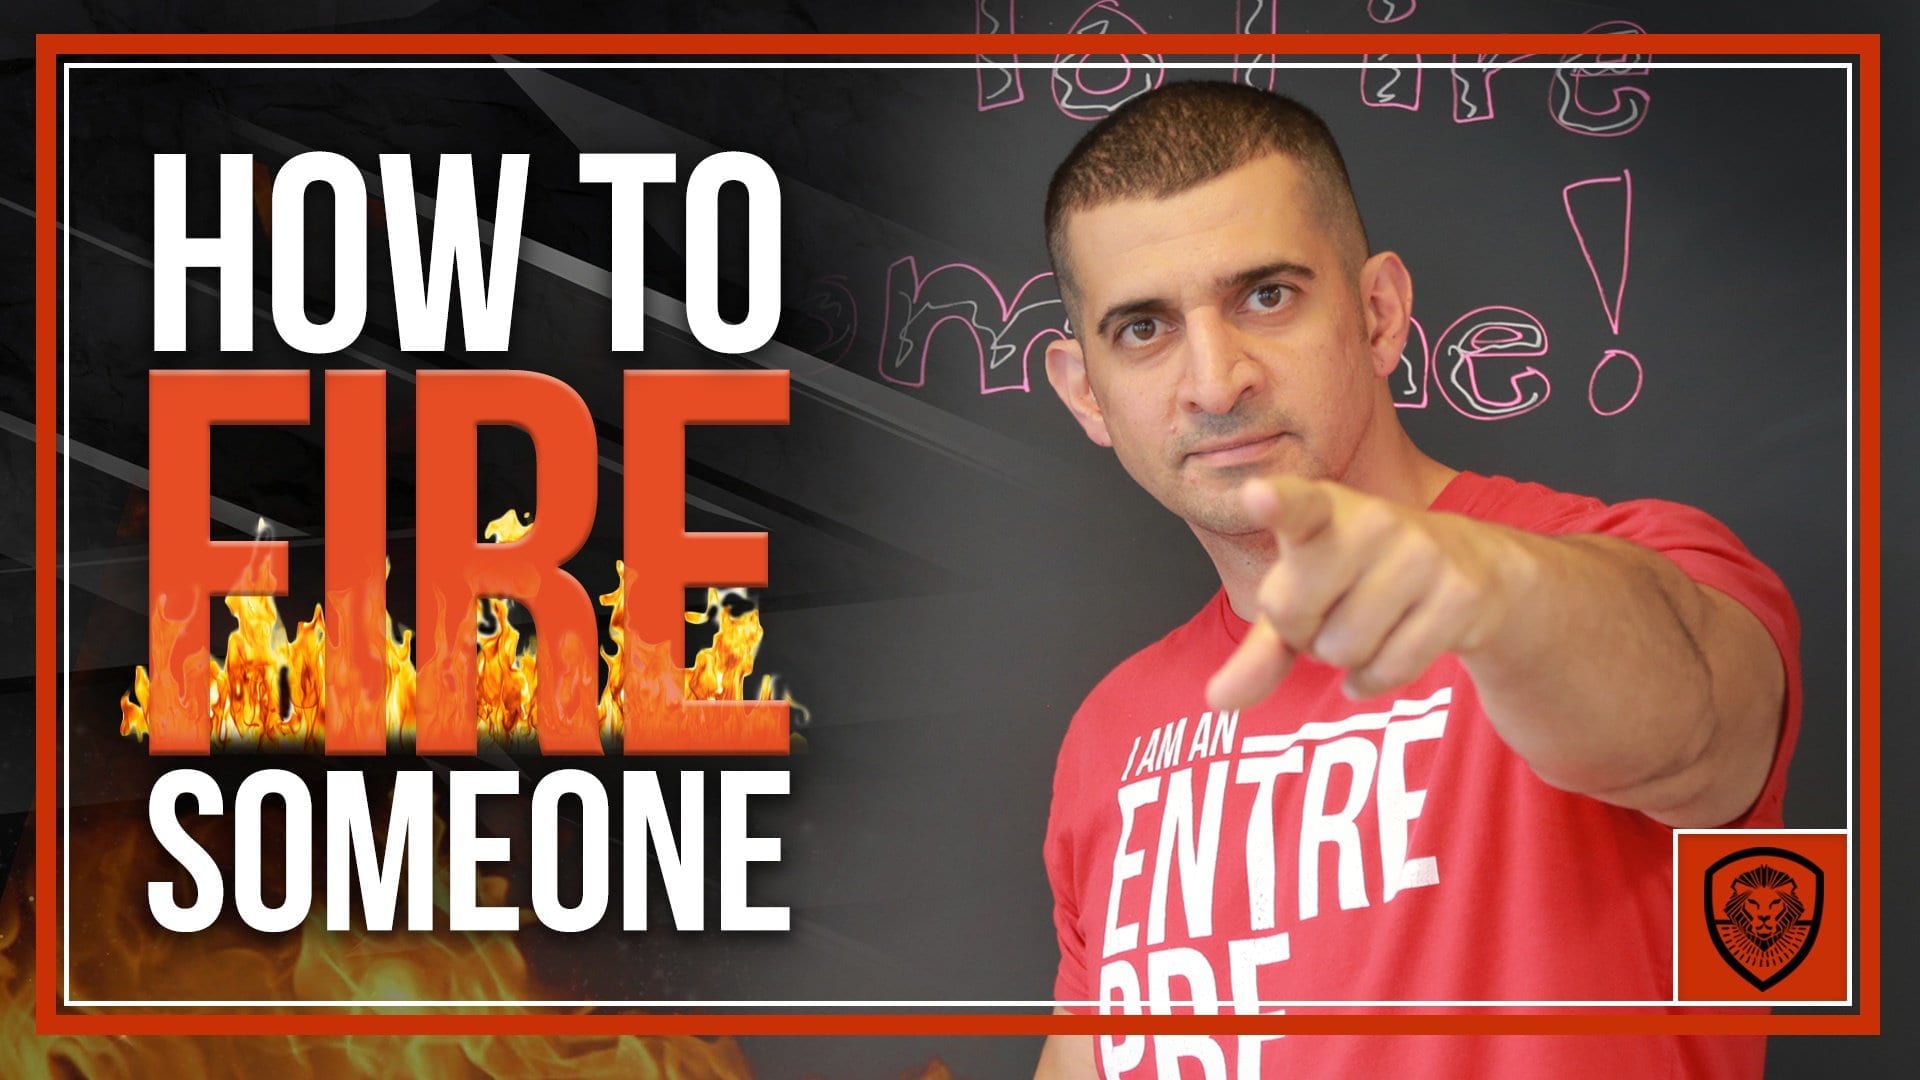 As a leader or entrepreneur, one of the most unpleasant but important things you need to learn is how to fire someone. Here are 11 tips for doing it right.